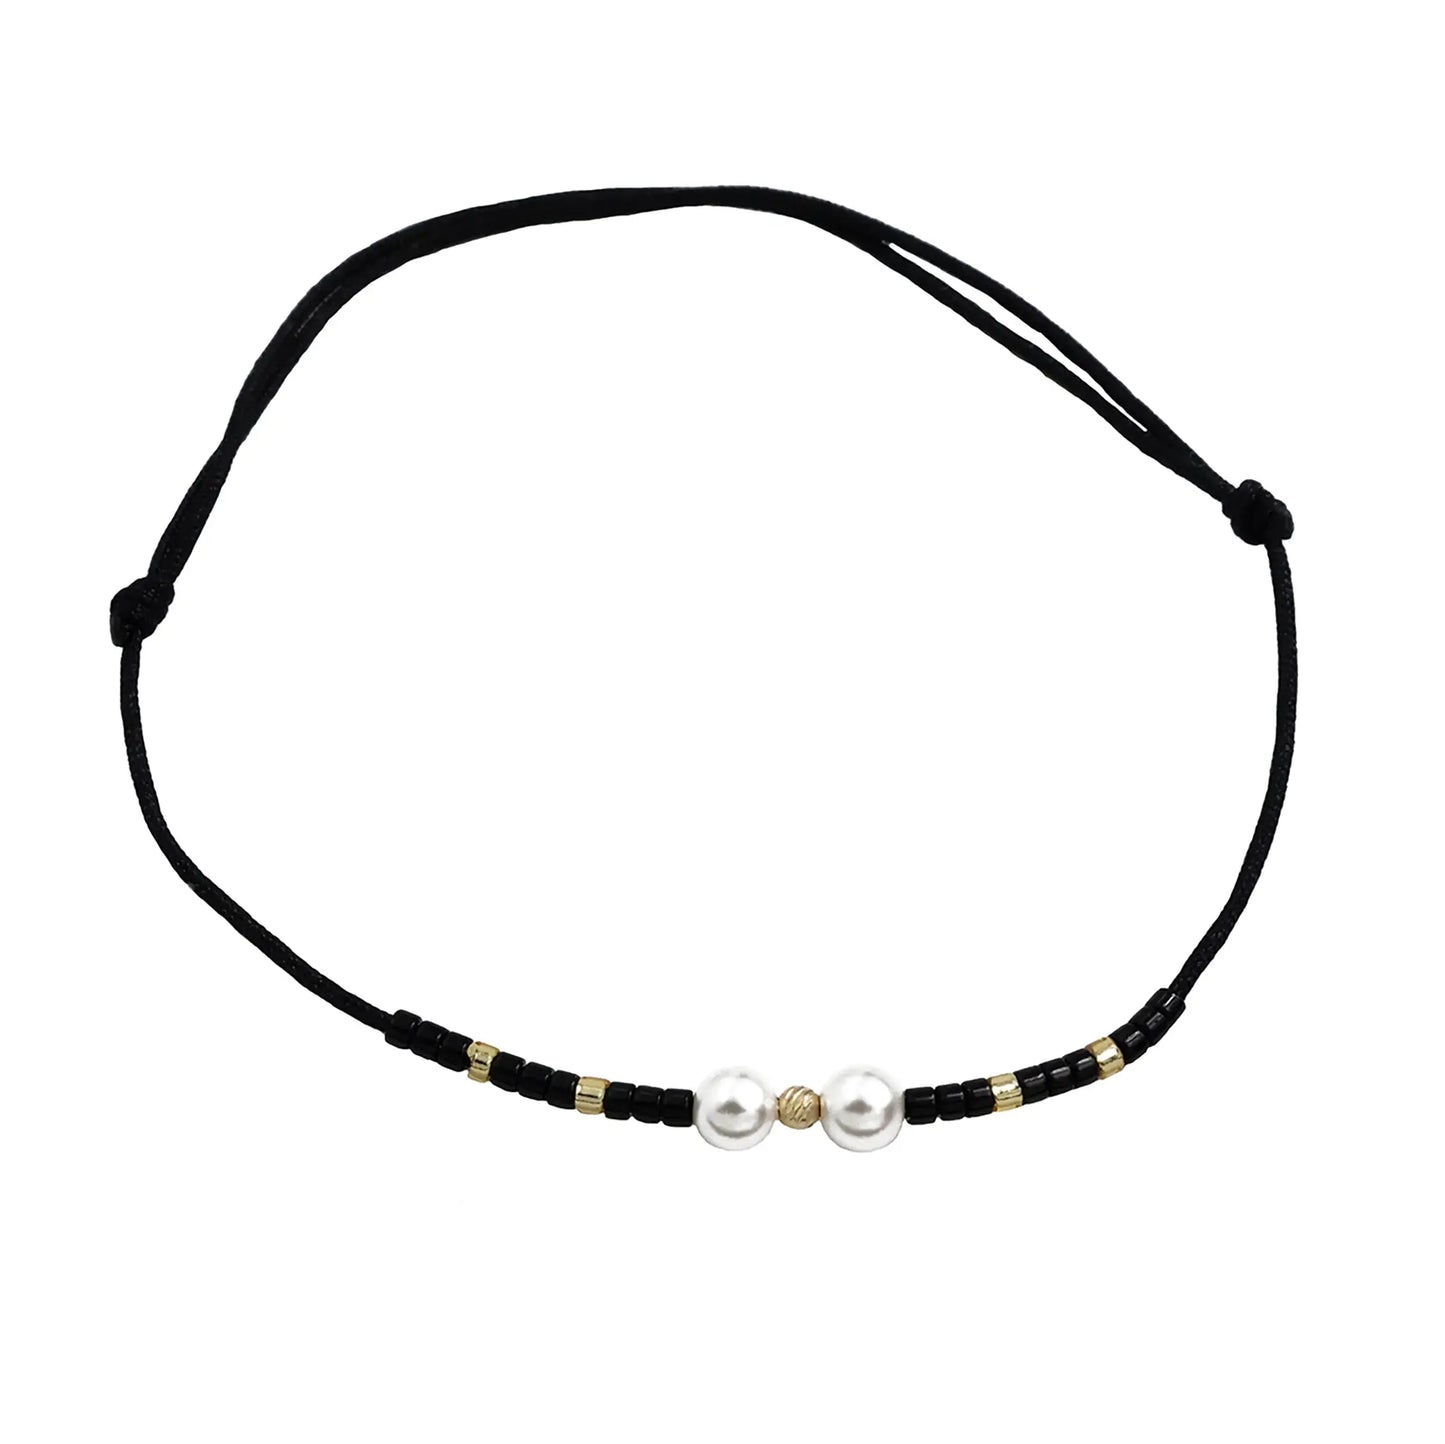 Bracelet with 1 bead of 14K solid gold, Miyuki beads and 2 artificial pearls-black Vega Lopez